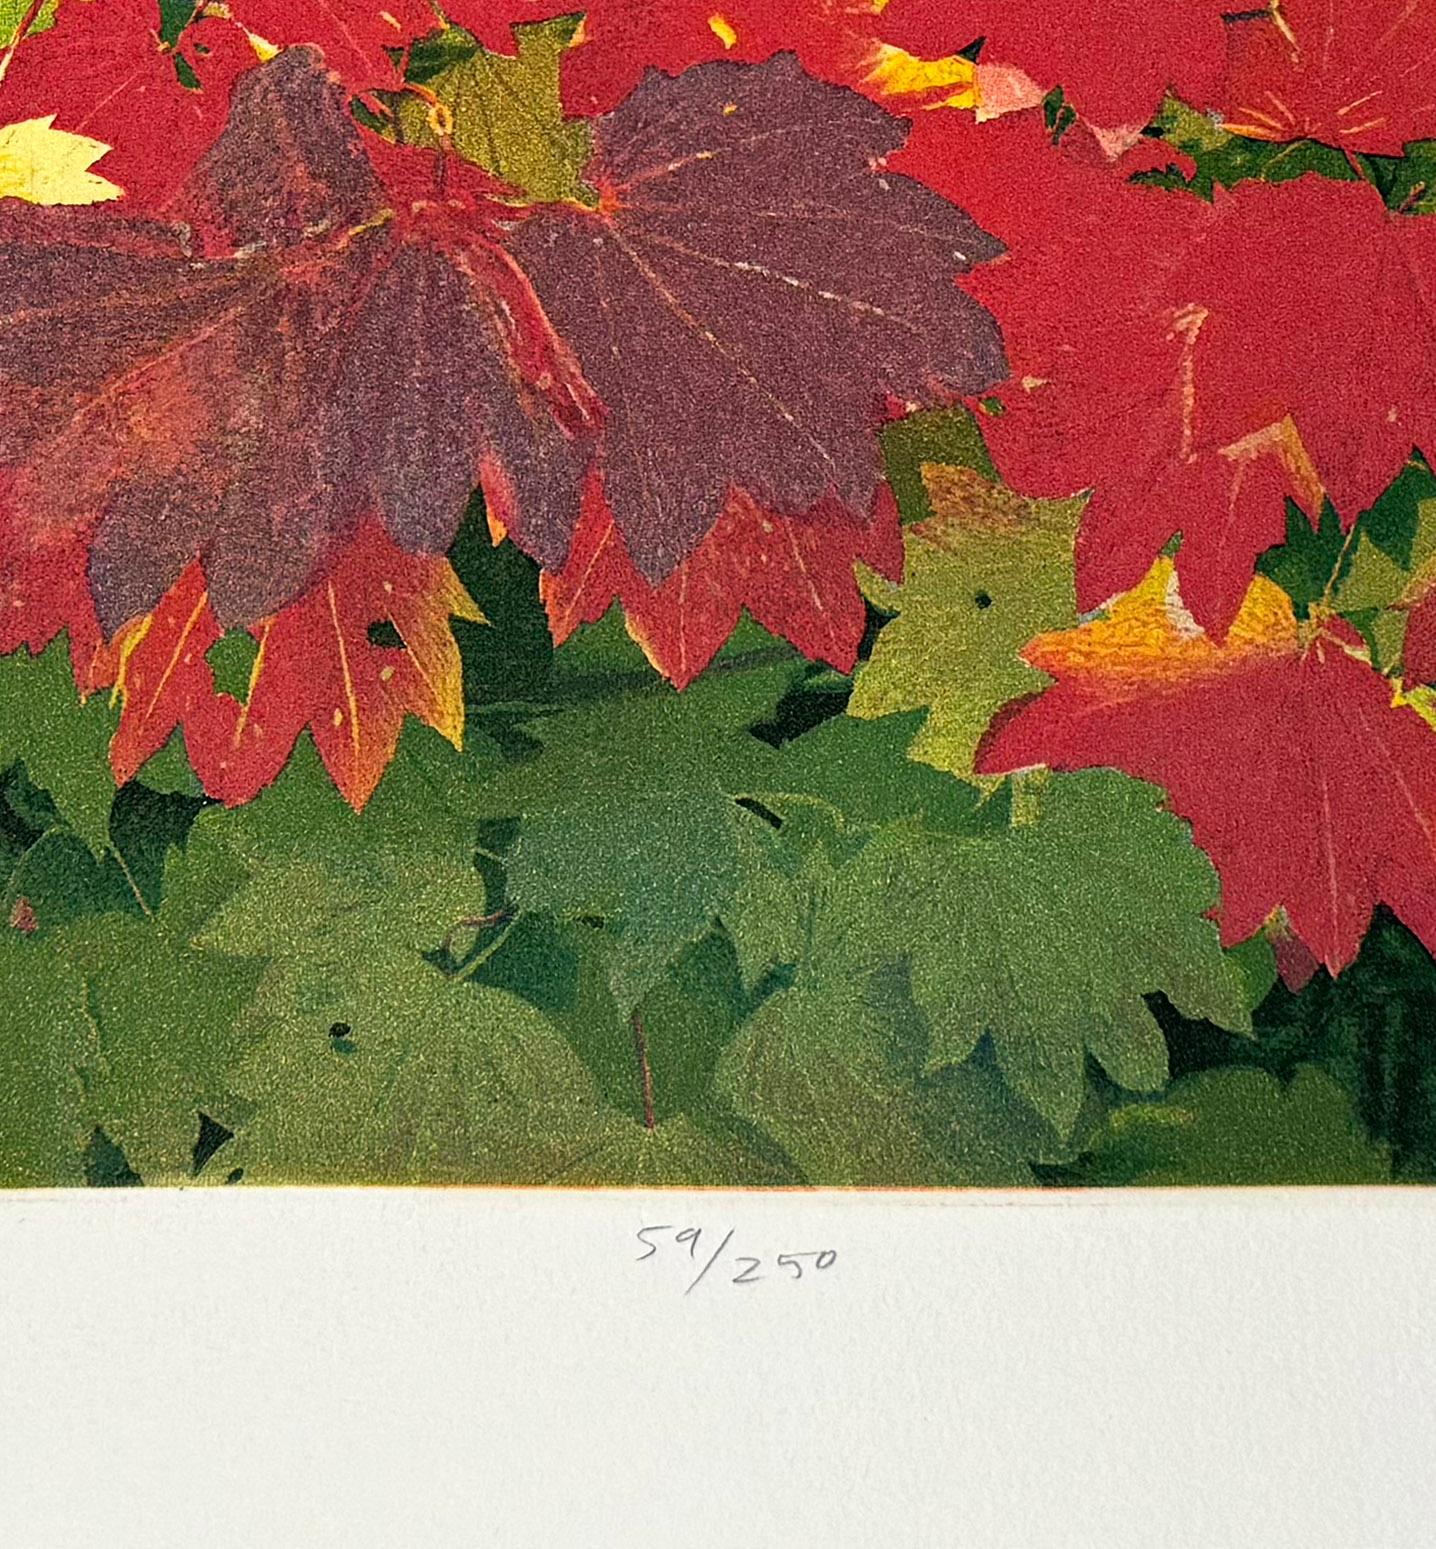 Signed, titled and numbered by the artist
Image Size: 12 x 18 inches
Year: 2007

Fall colors in Bellingham, WA. Scene of sunlight on fall foliage. Signed and numbered etching and aquatint

Born in Berkeley, California, on December 21, 1949, he was